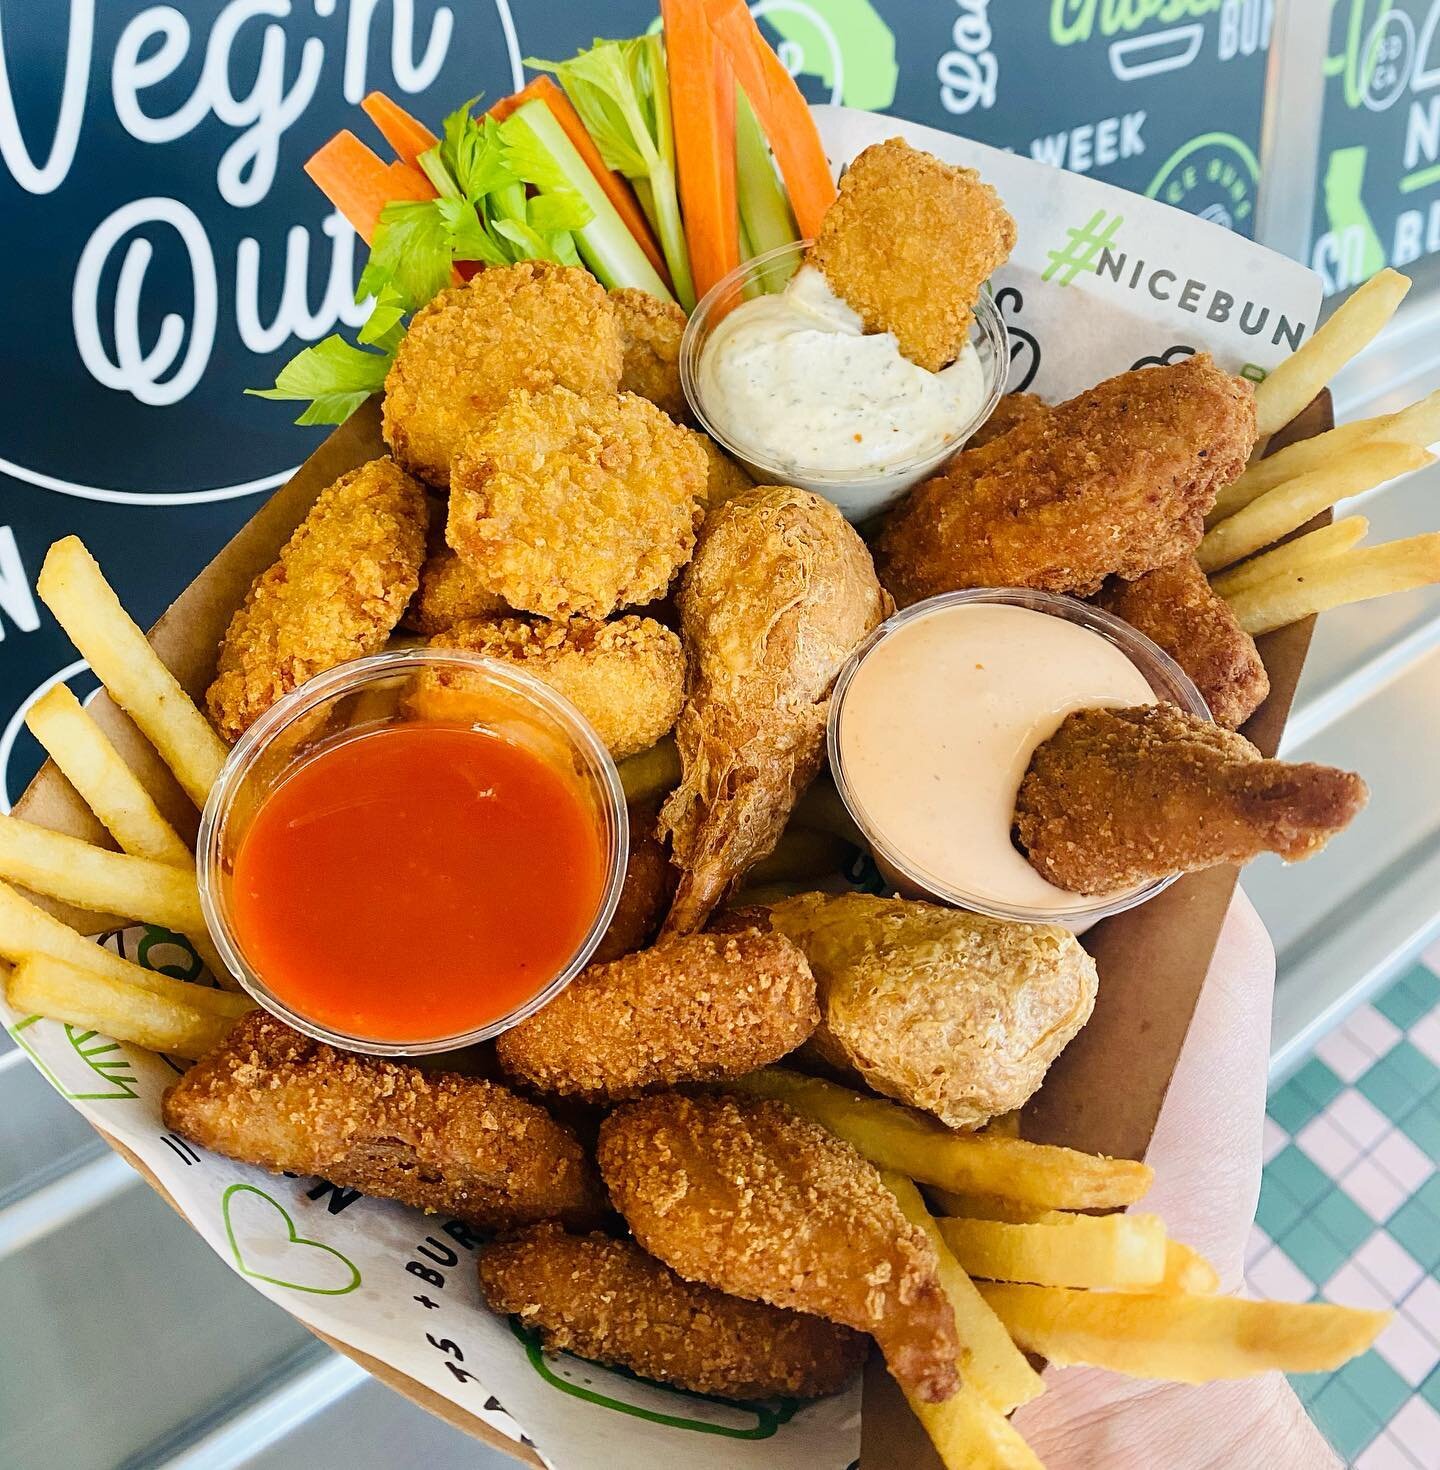 Are you ready for The Big Game?  Weather you&rsquo;re throwing a party and need to order for a crowd, or just want to feed a few, we&rsquo;ve got you covered with our Game Day Platters! 

Click the &ldquo;Order Food&rdquo; button here on our page or 